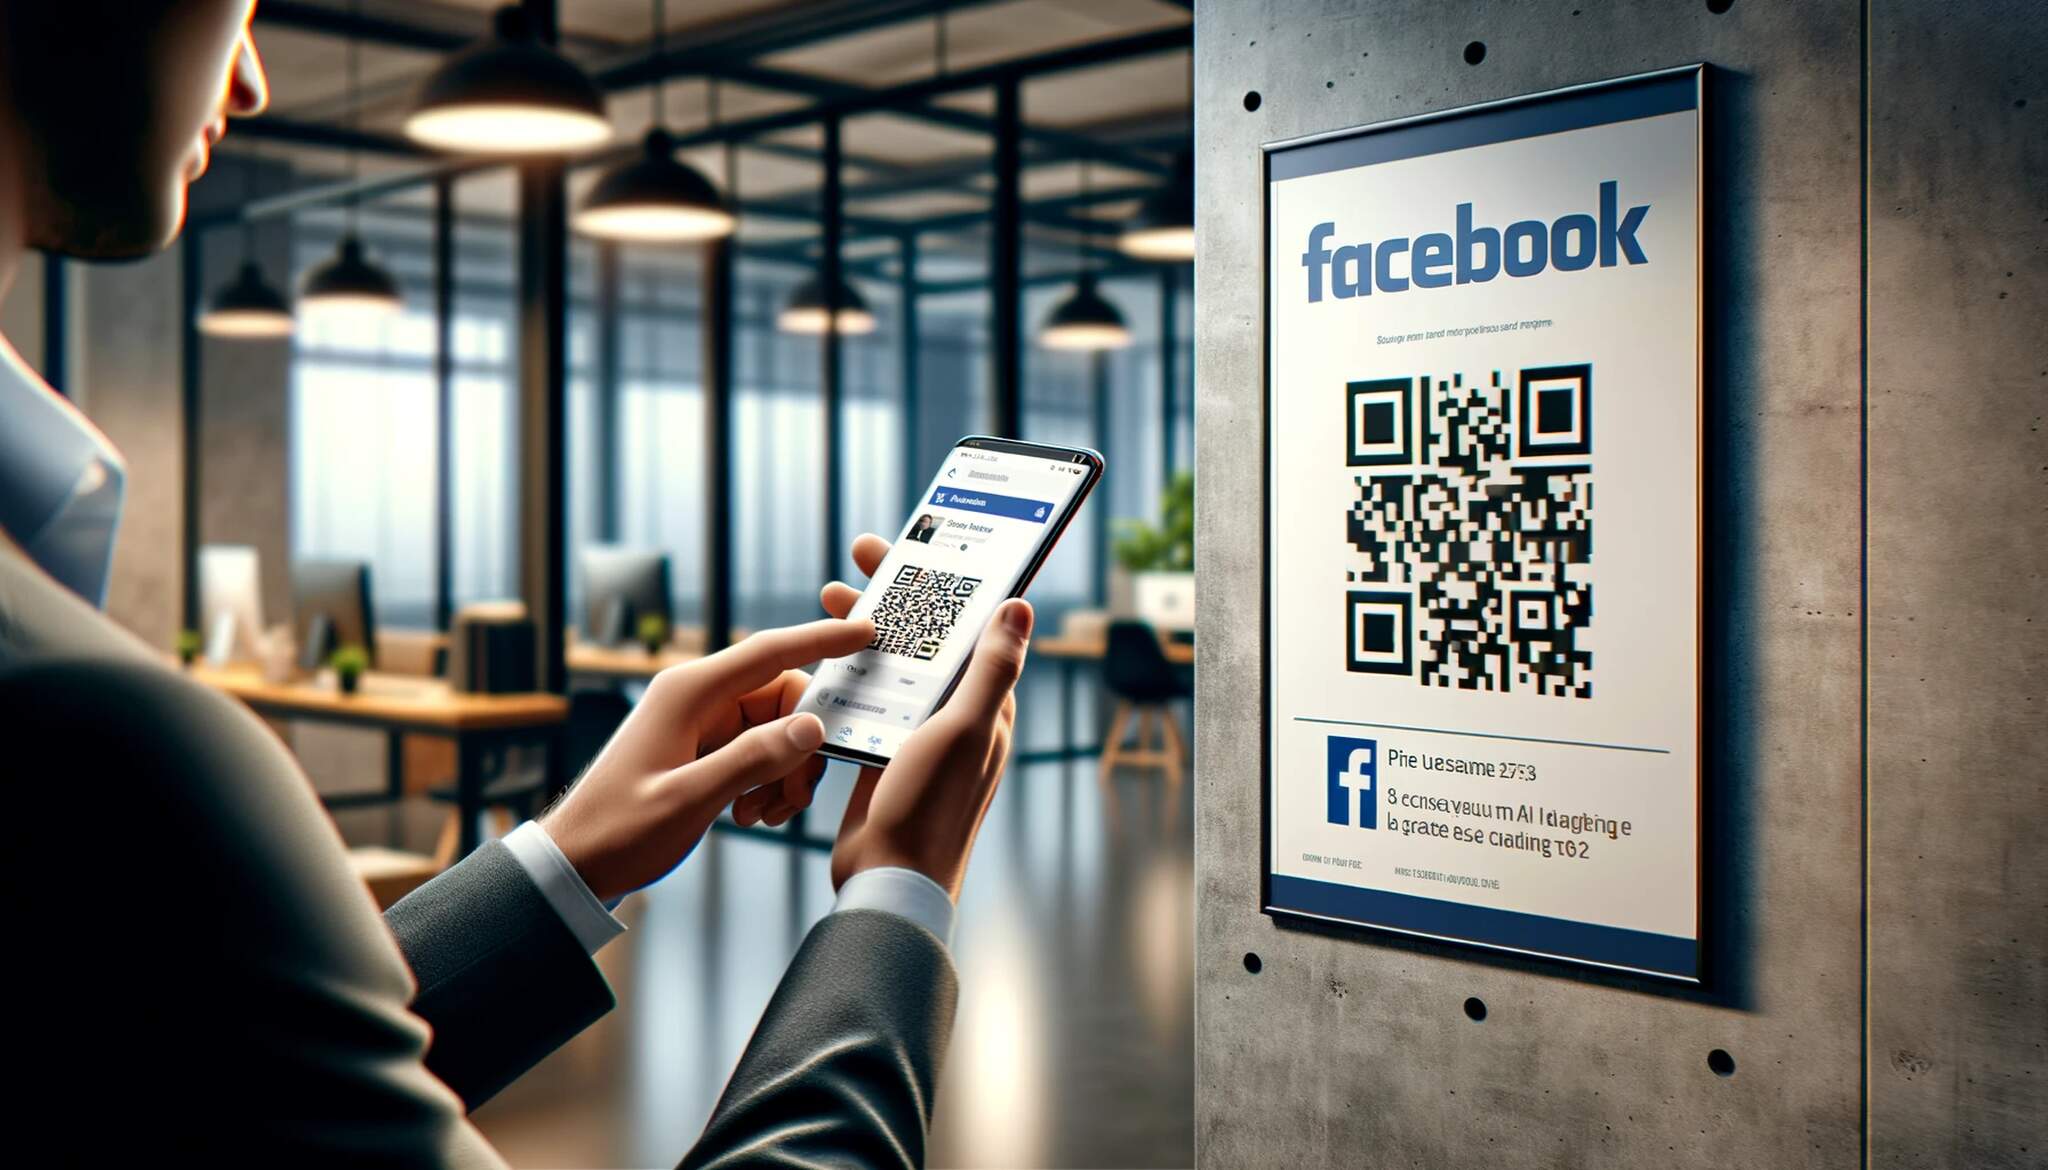 a person scanning a QR code on a poster that links to a Facebook page